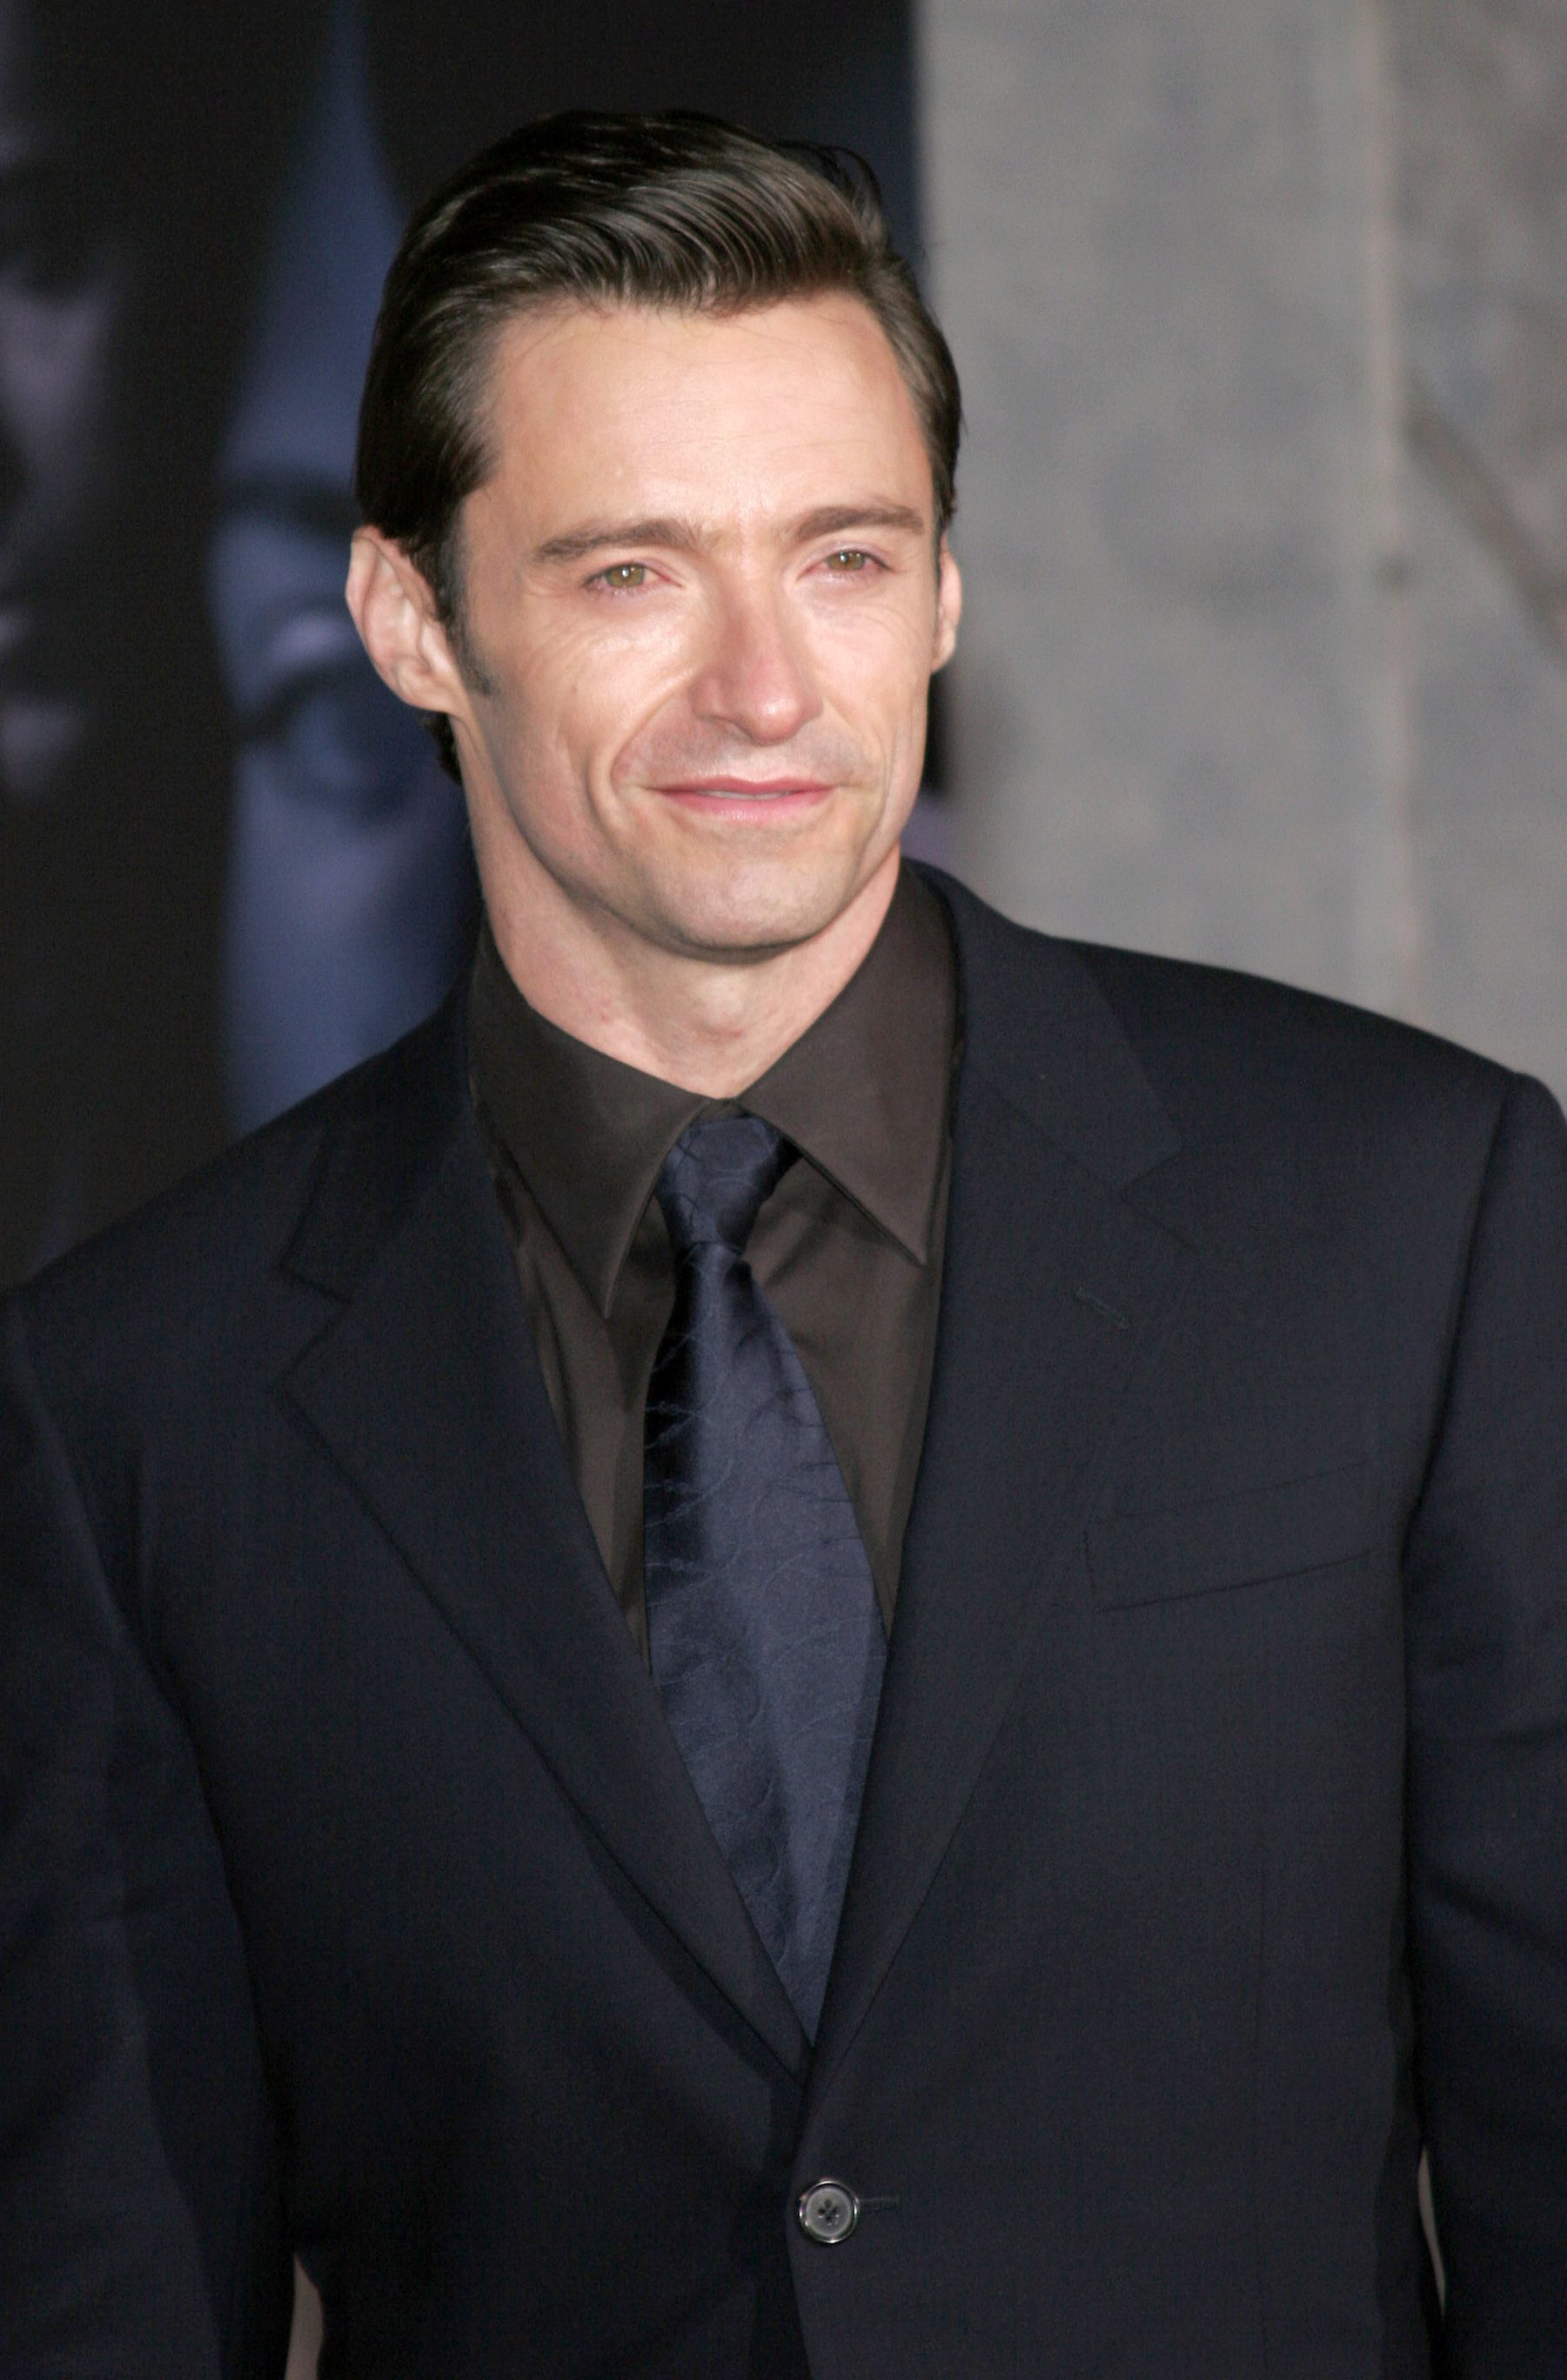 Hugh Jackman - The Sexiest Mutant on The Planet